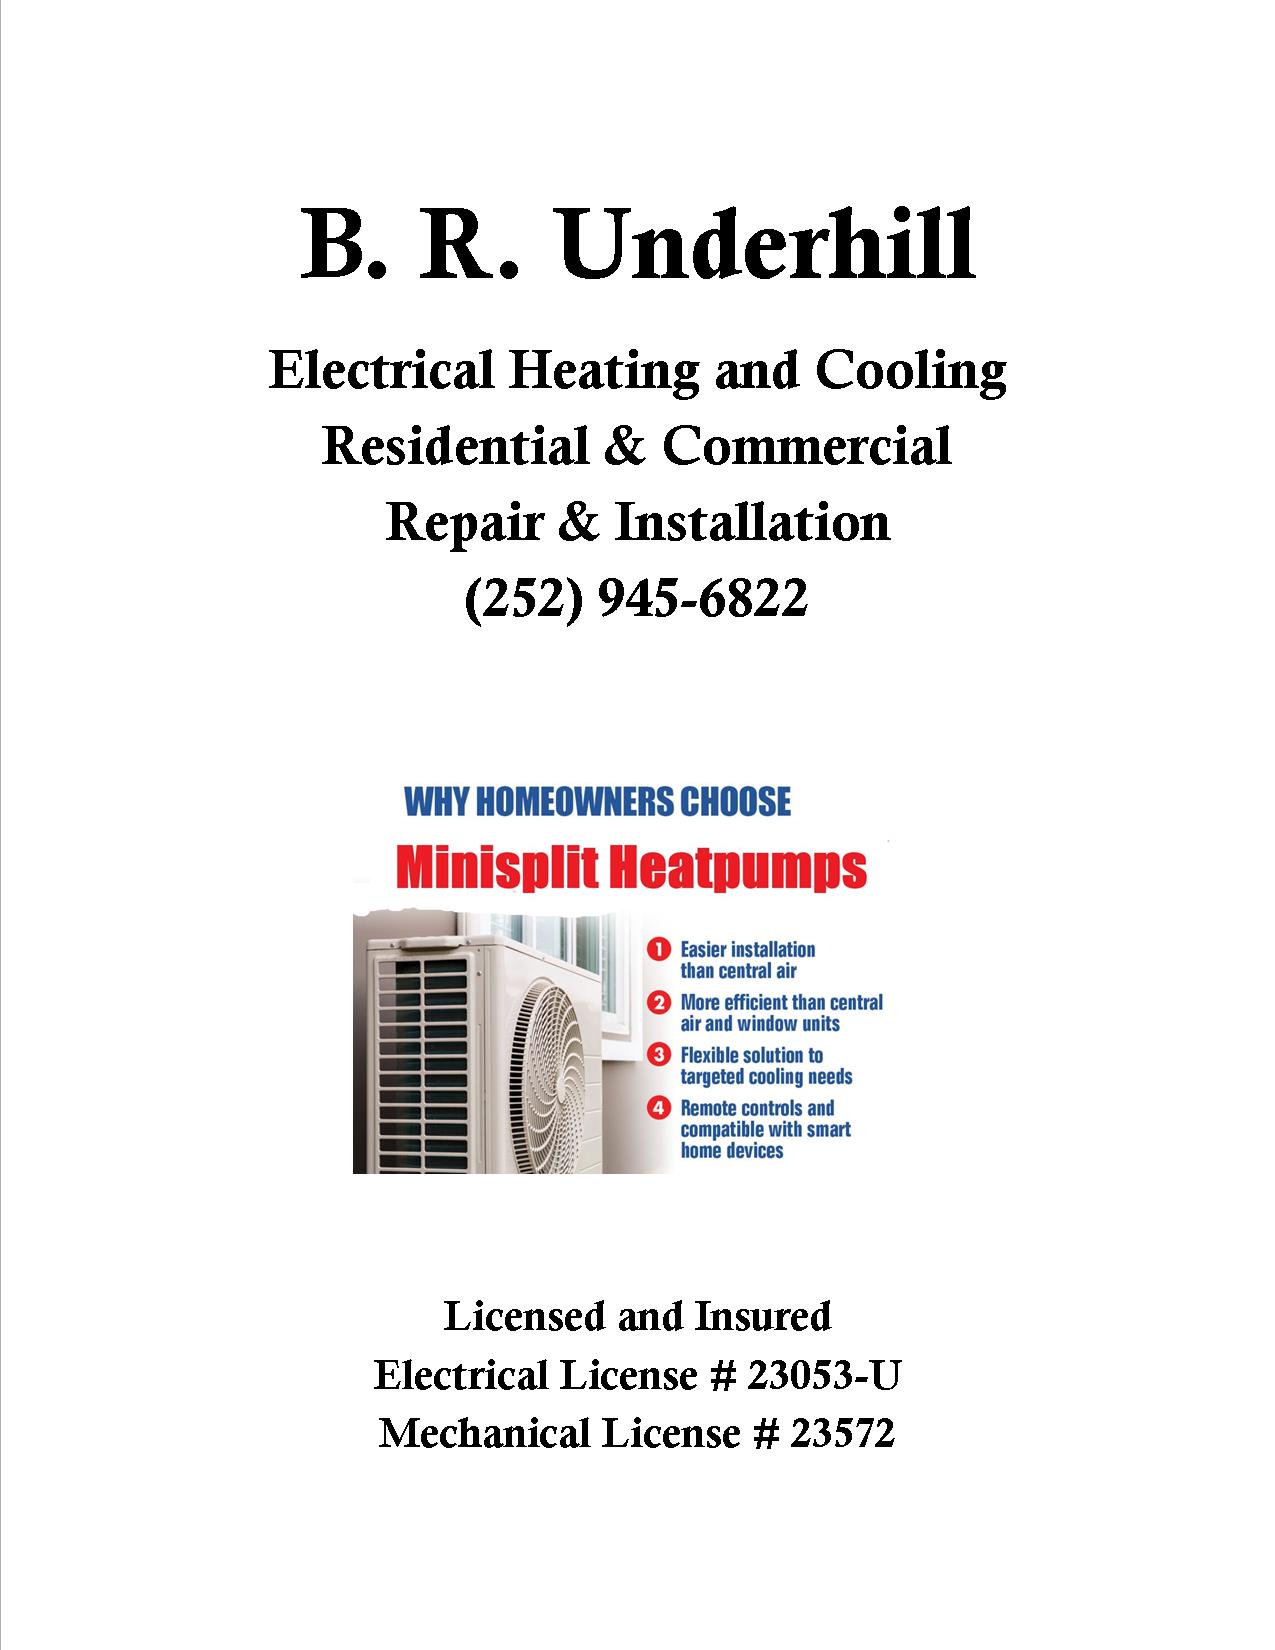 Underhill Electrical Heating and Cooling